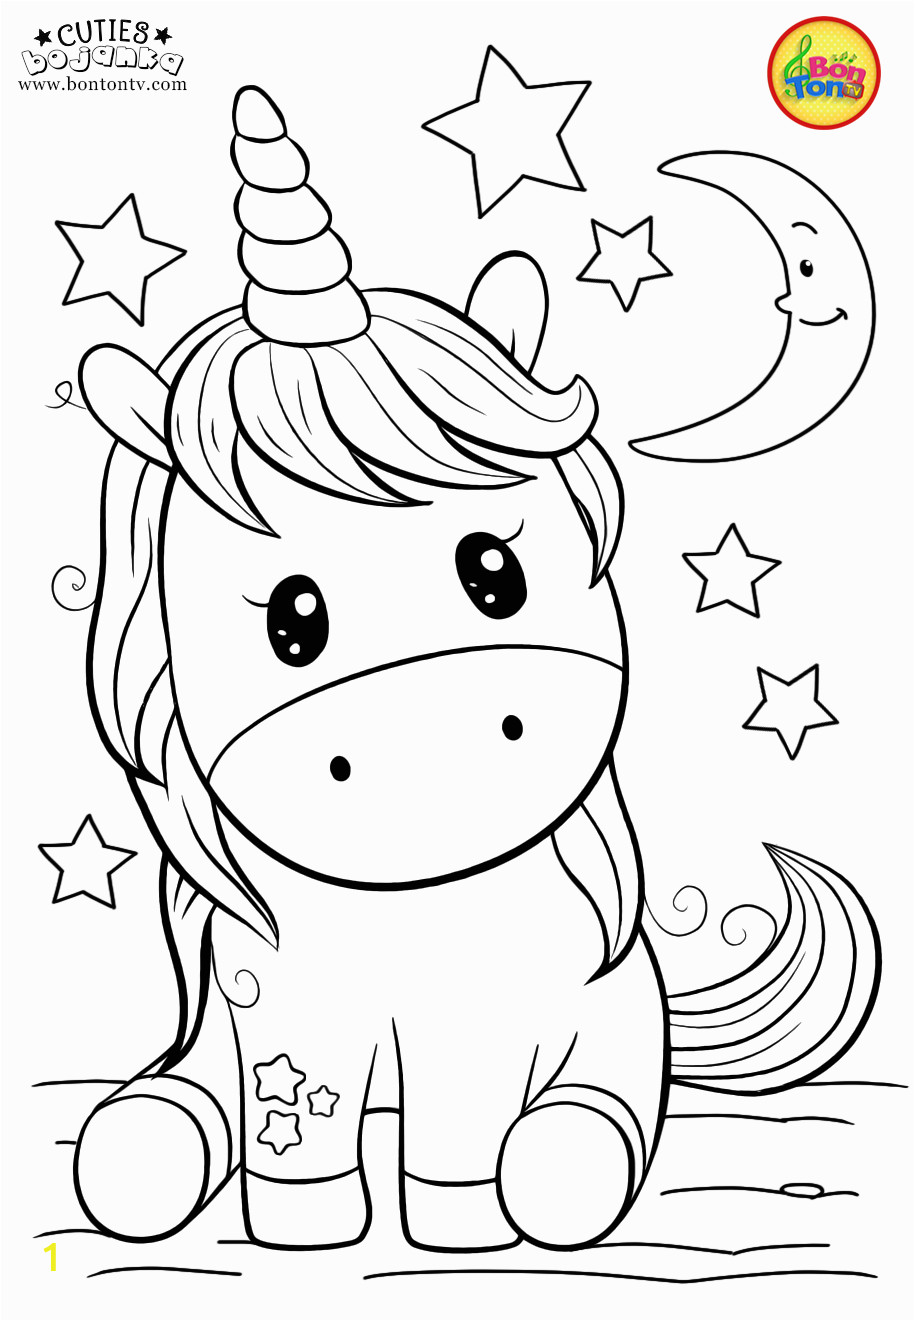 Disney Princess Coloring Pages Youtube Cuties Coloring Pages for Kids Free Preschool Printables